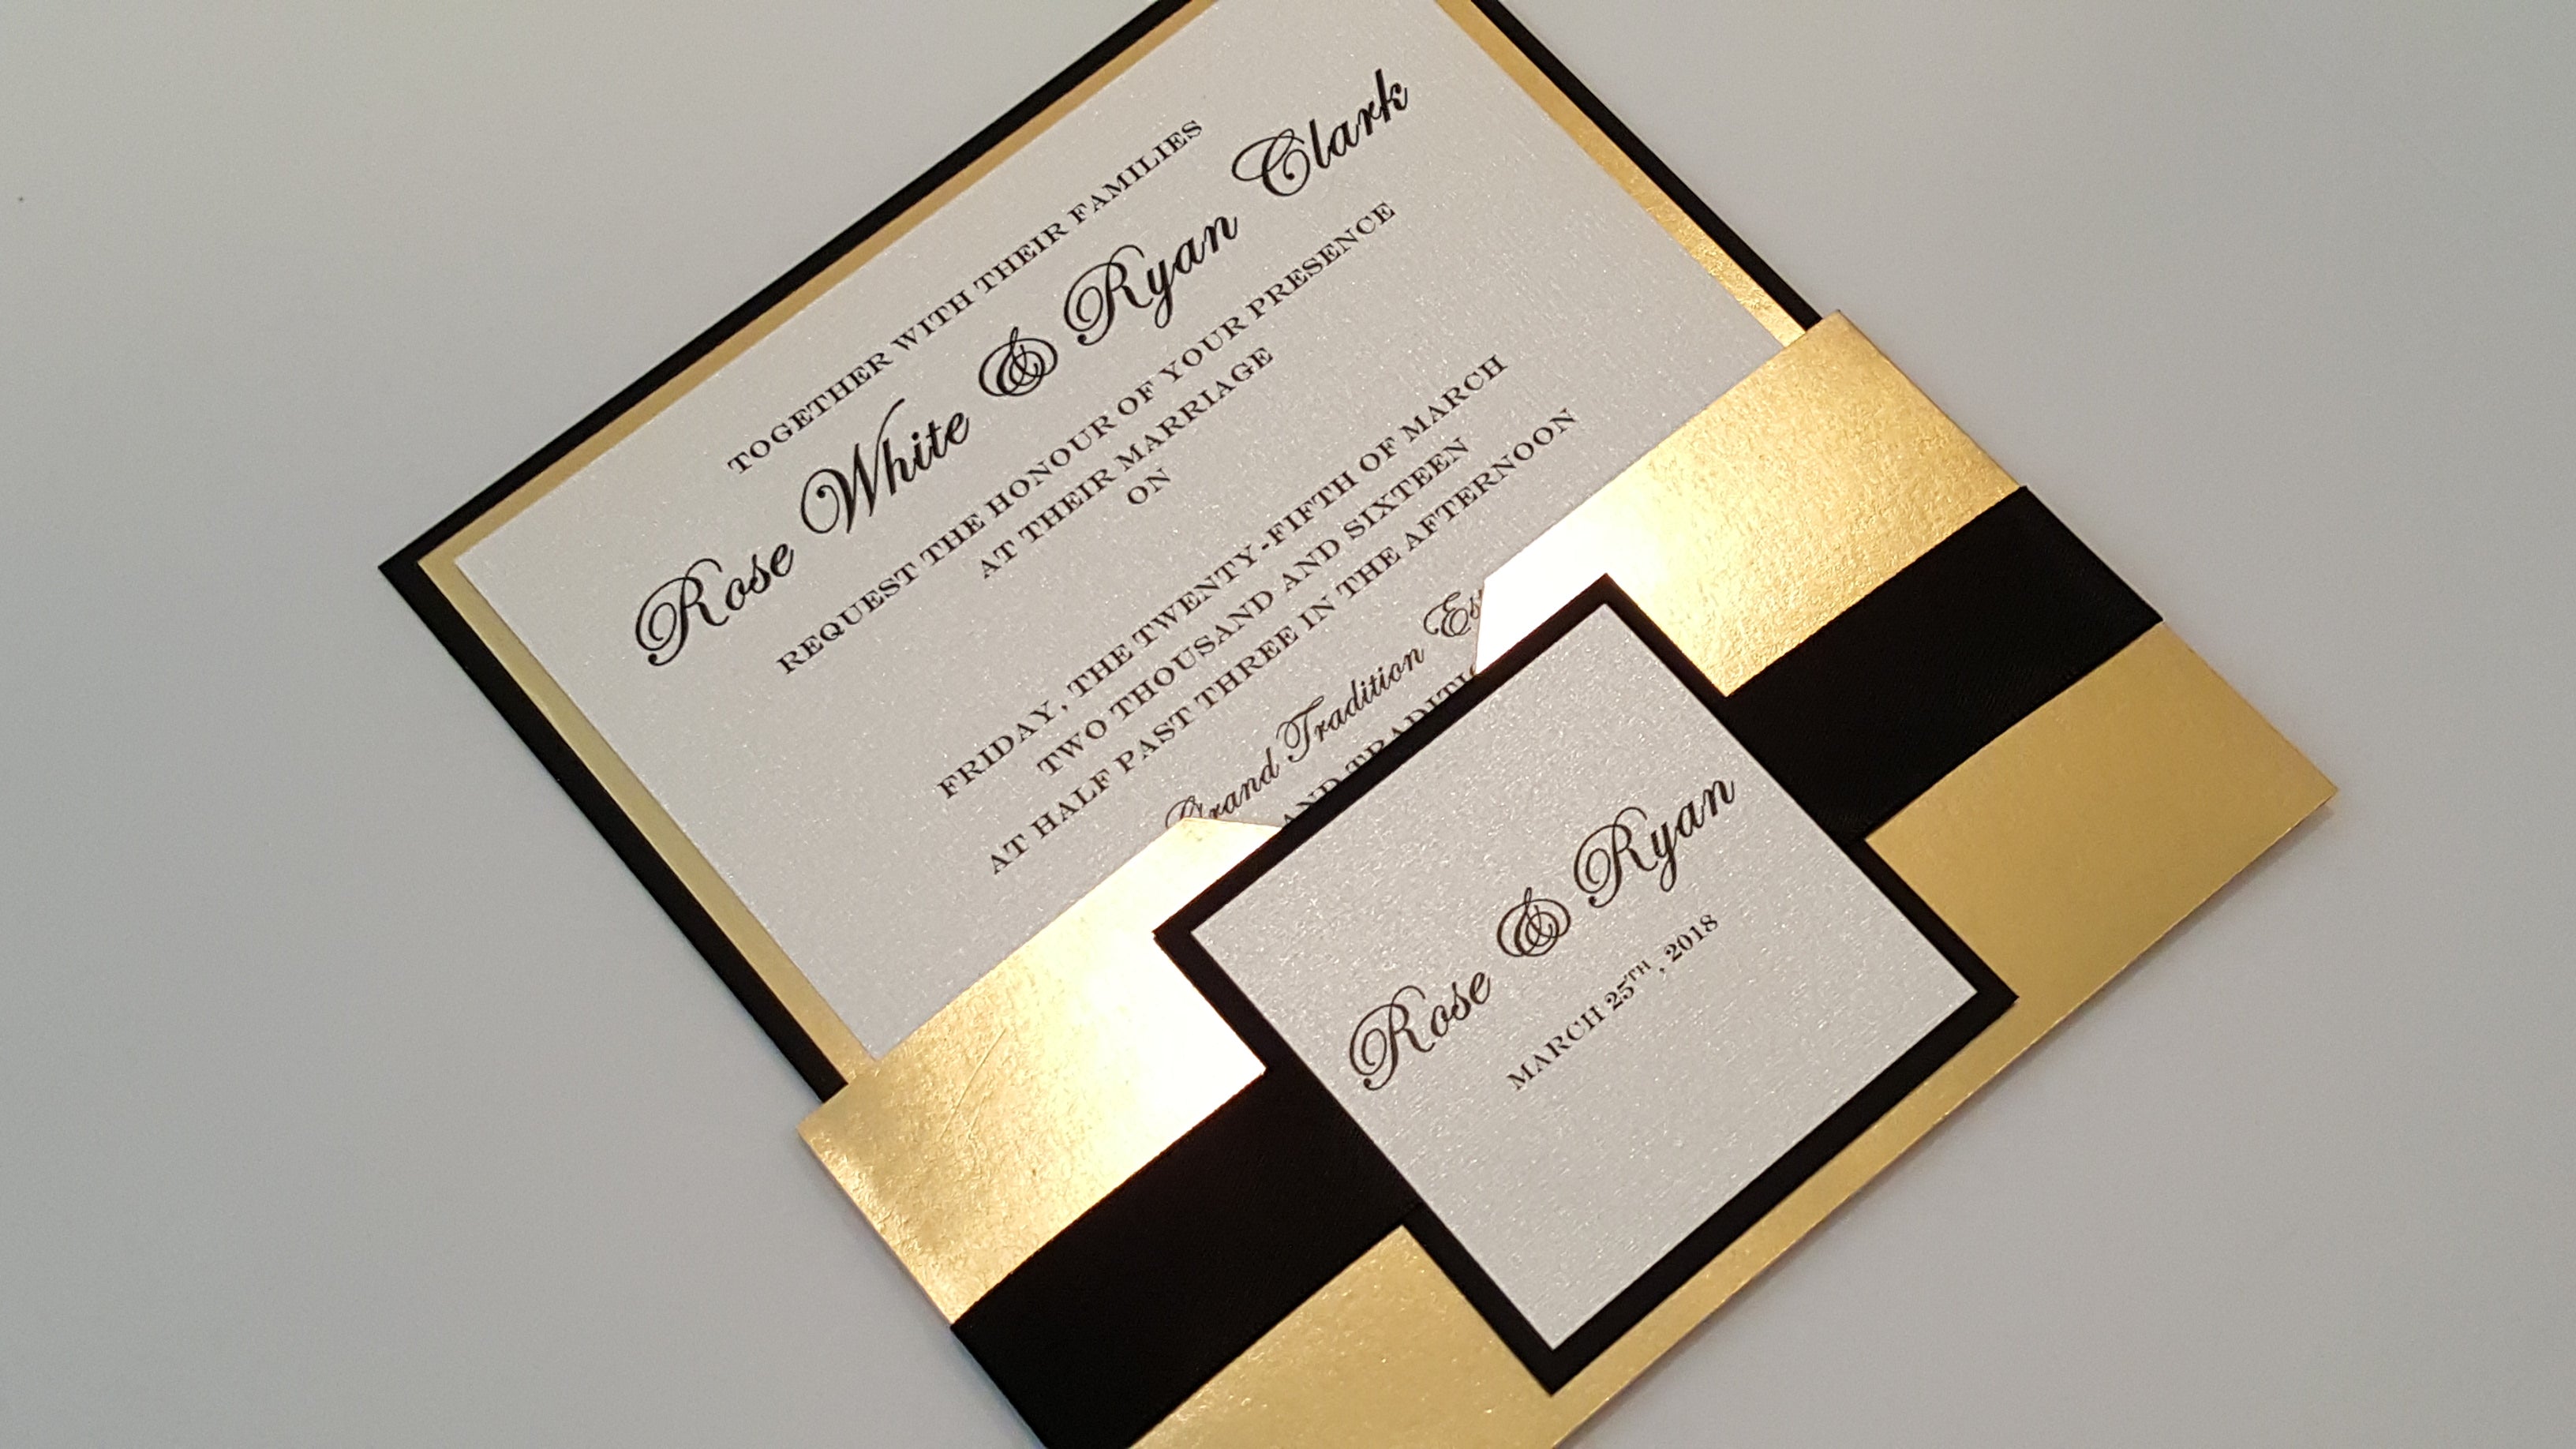 Layered Invitation comes with RSVP cards and envelopes